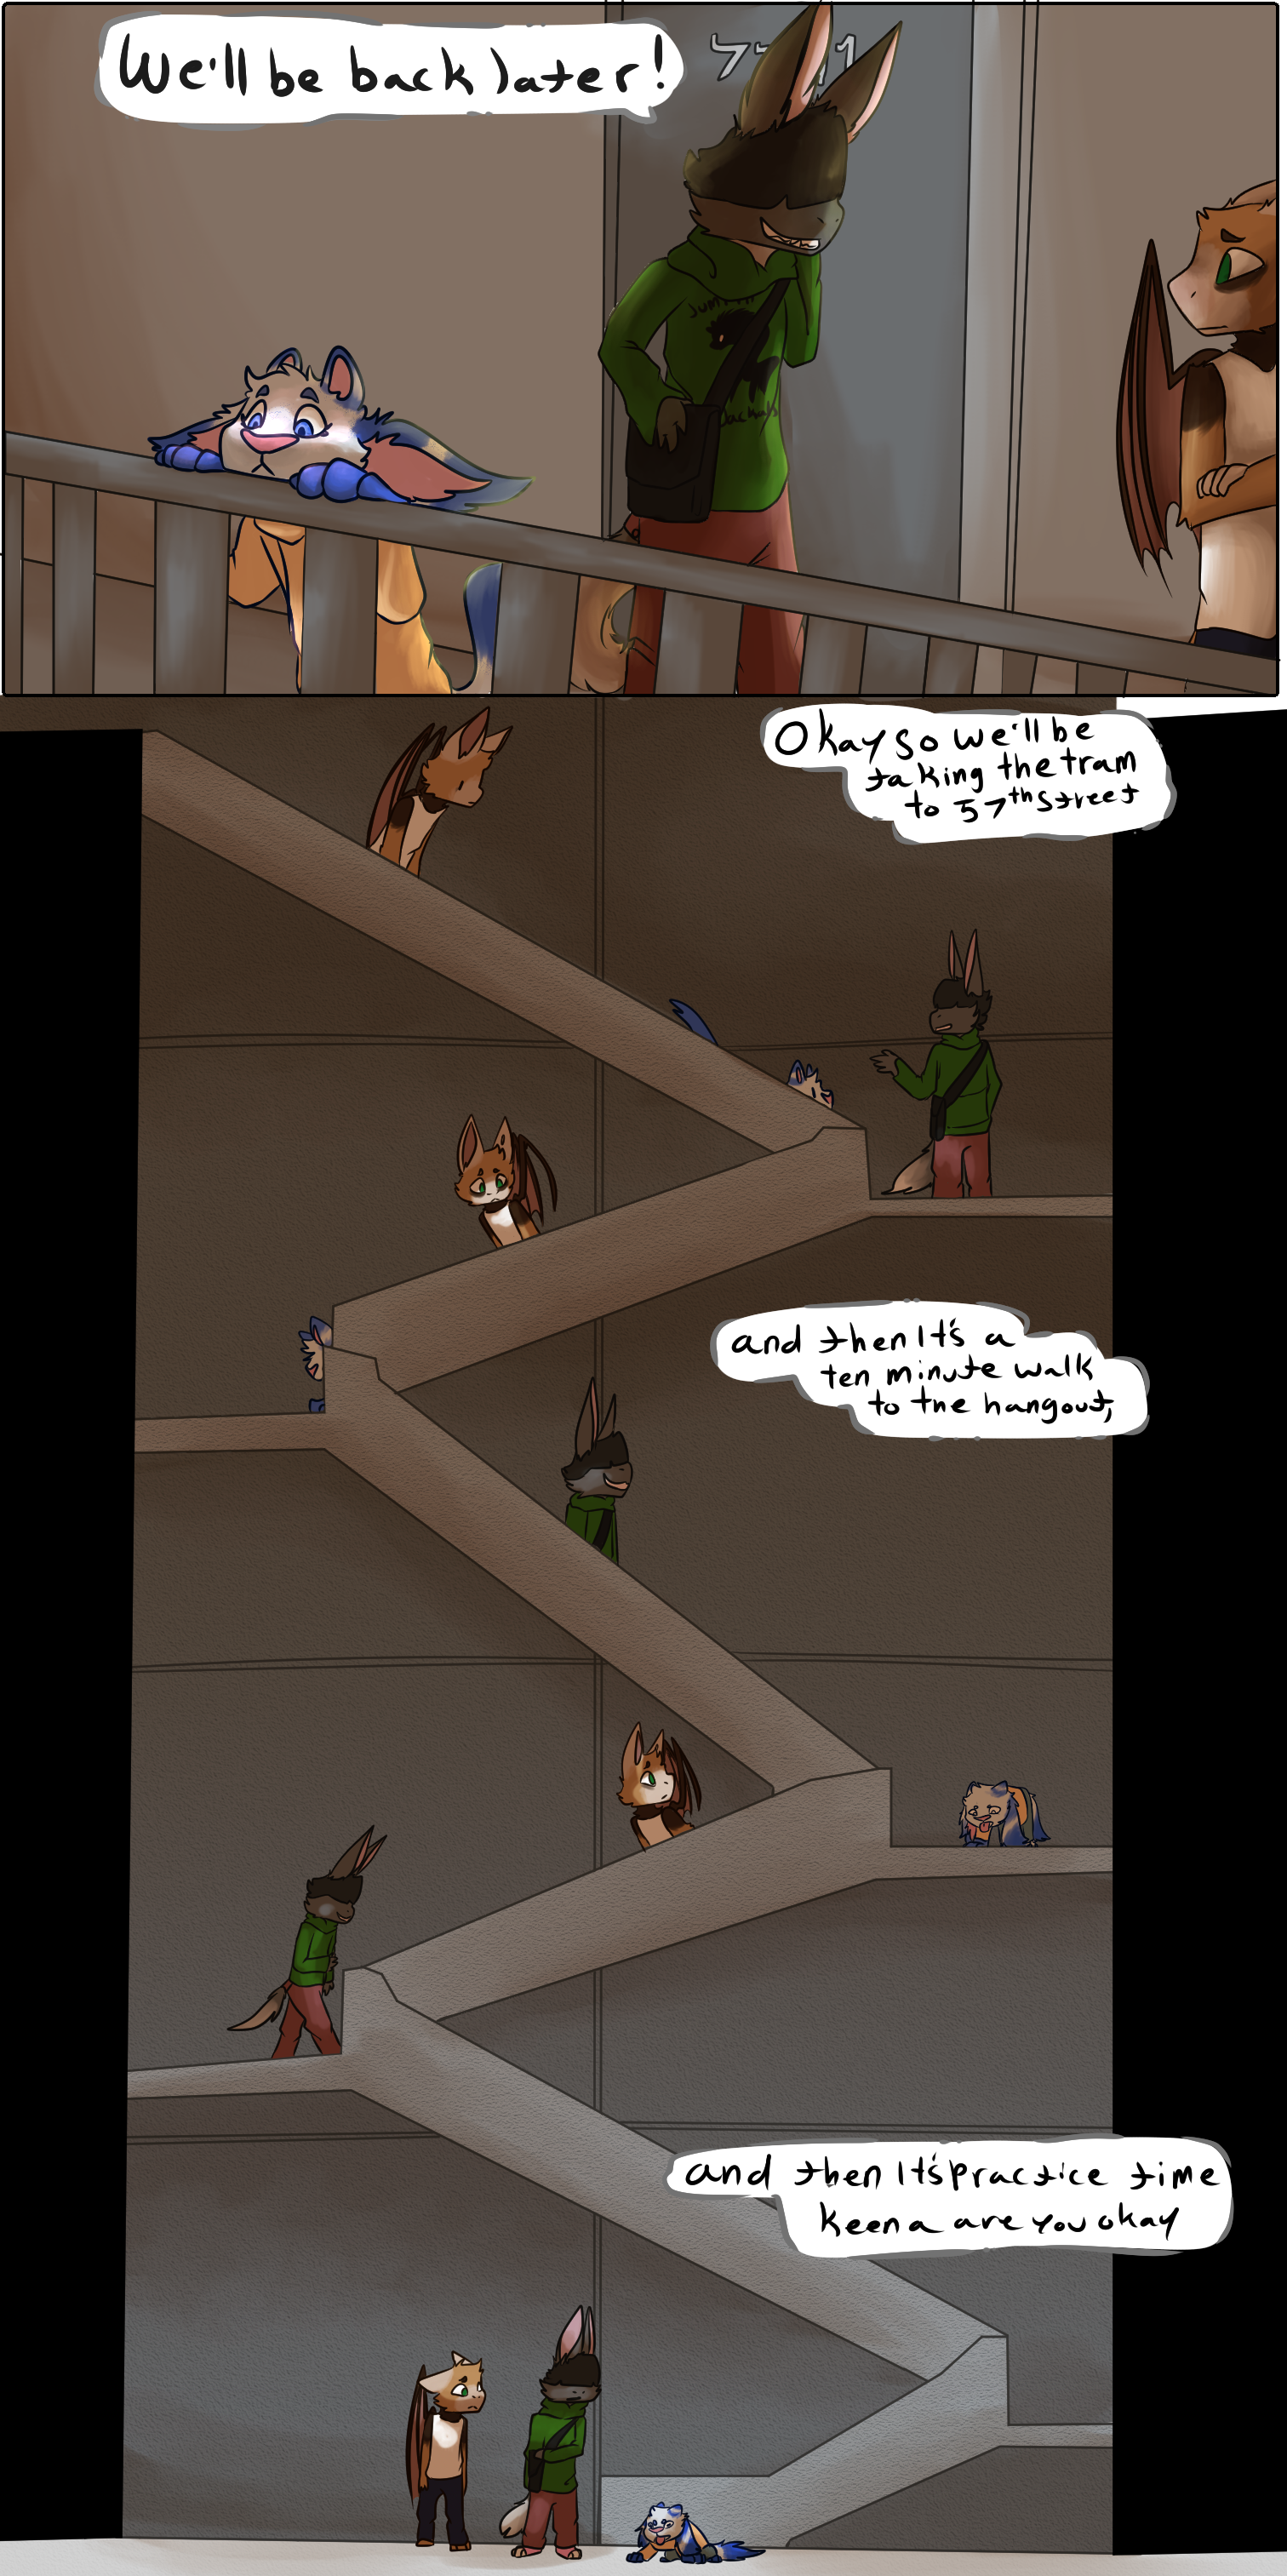 page 25  - Stairs, again